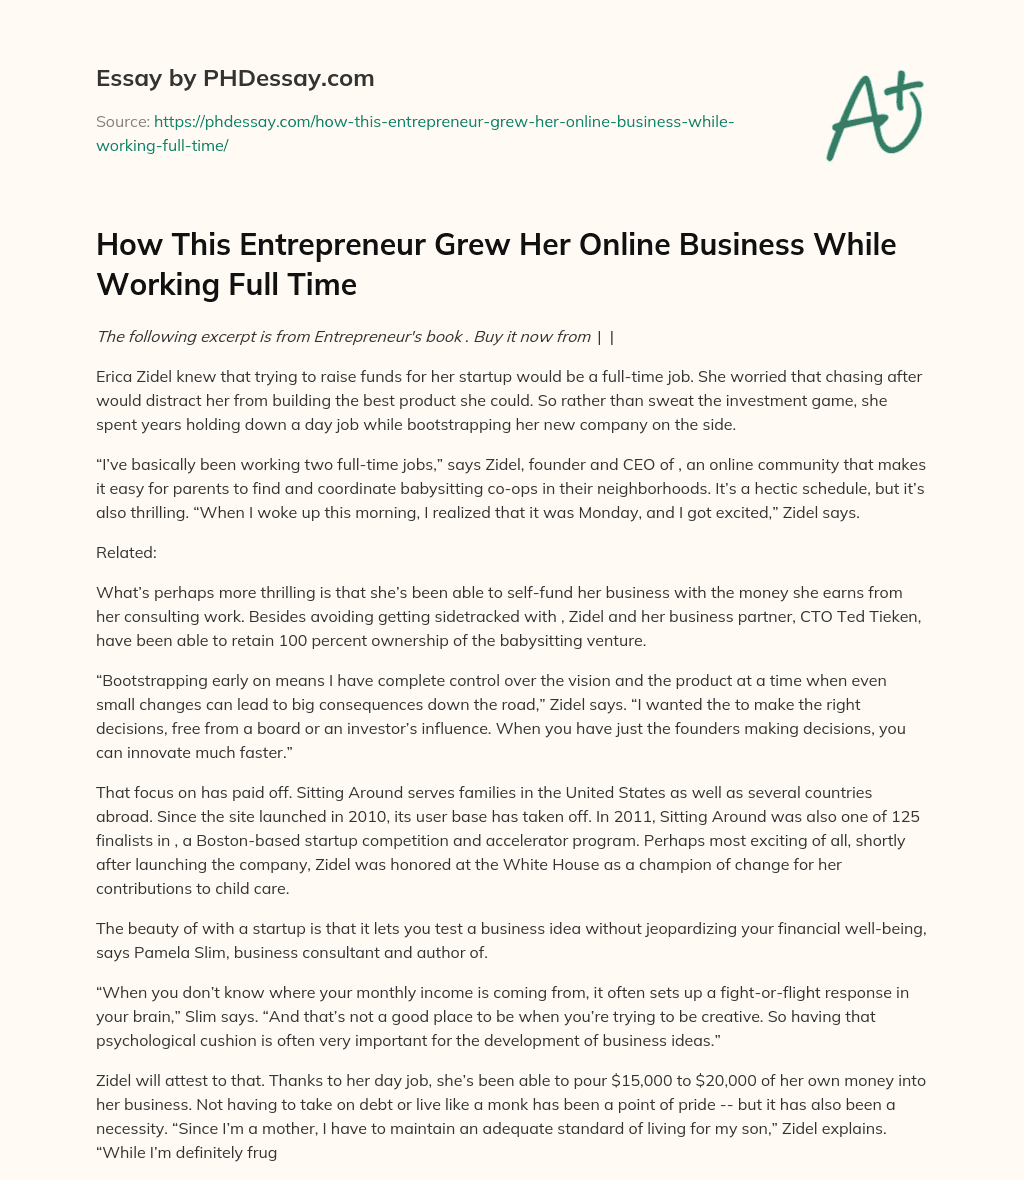 How This Entrepreneur Grew Her Online Business While Working Full Time essay